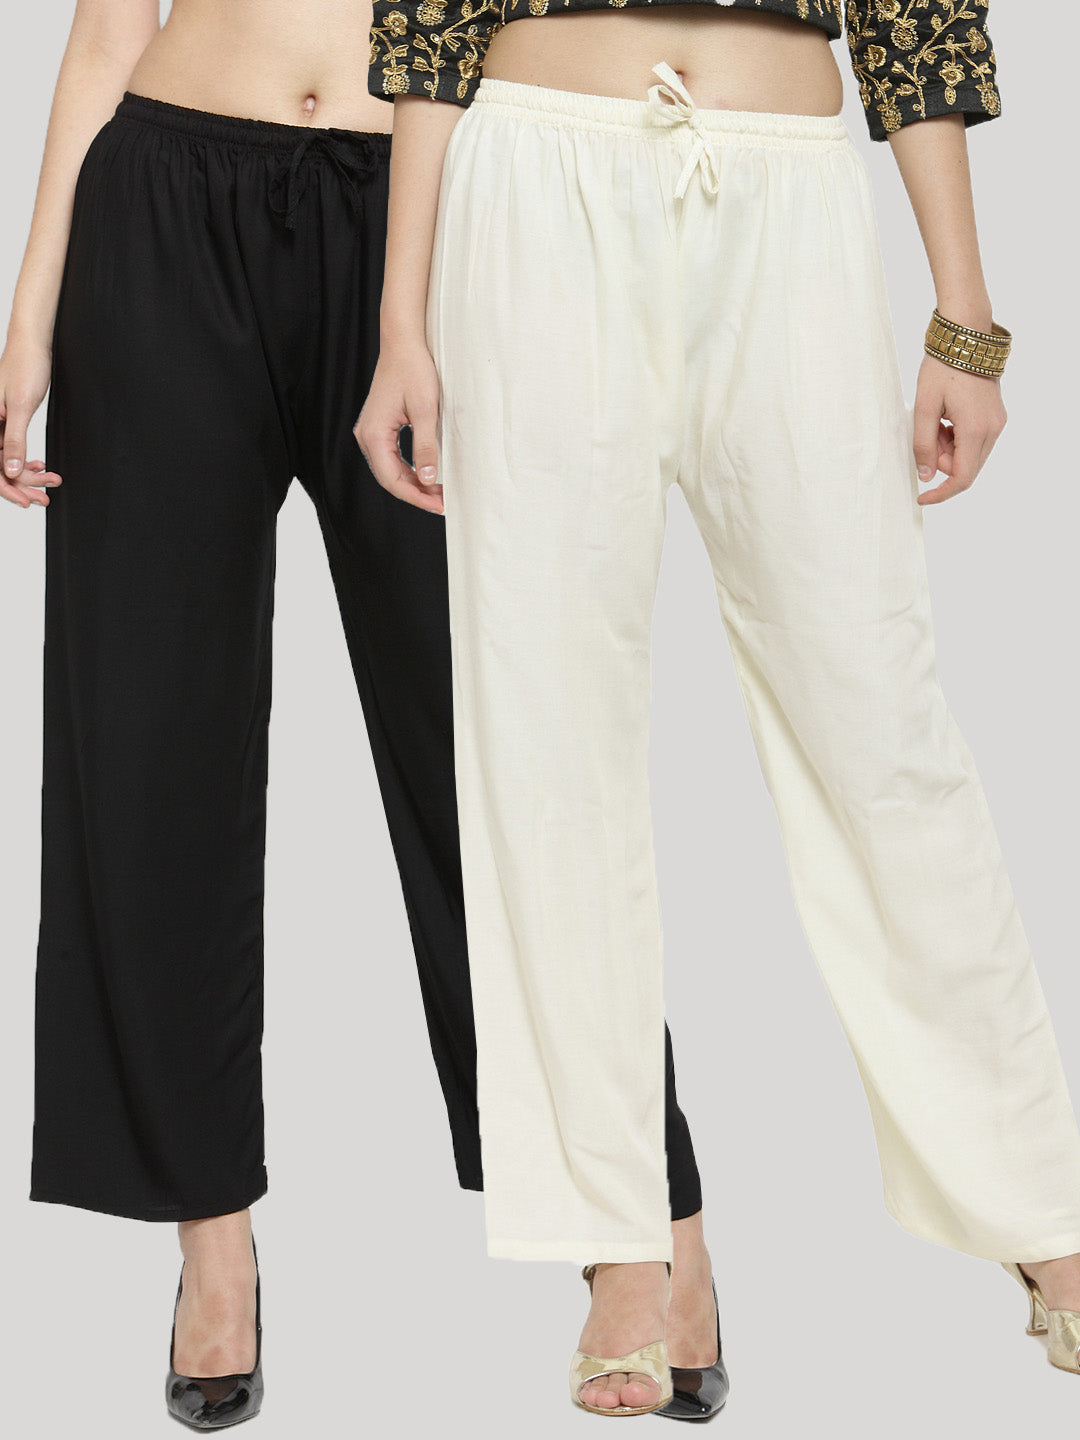 Women's Solid Black & Off-White Rayon Palazzo (Pack Of 2) - Wahe-NOOR